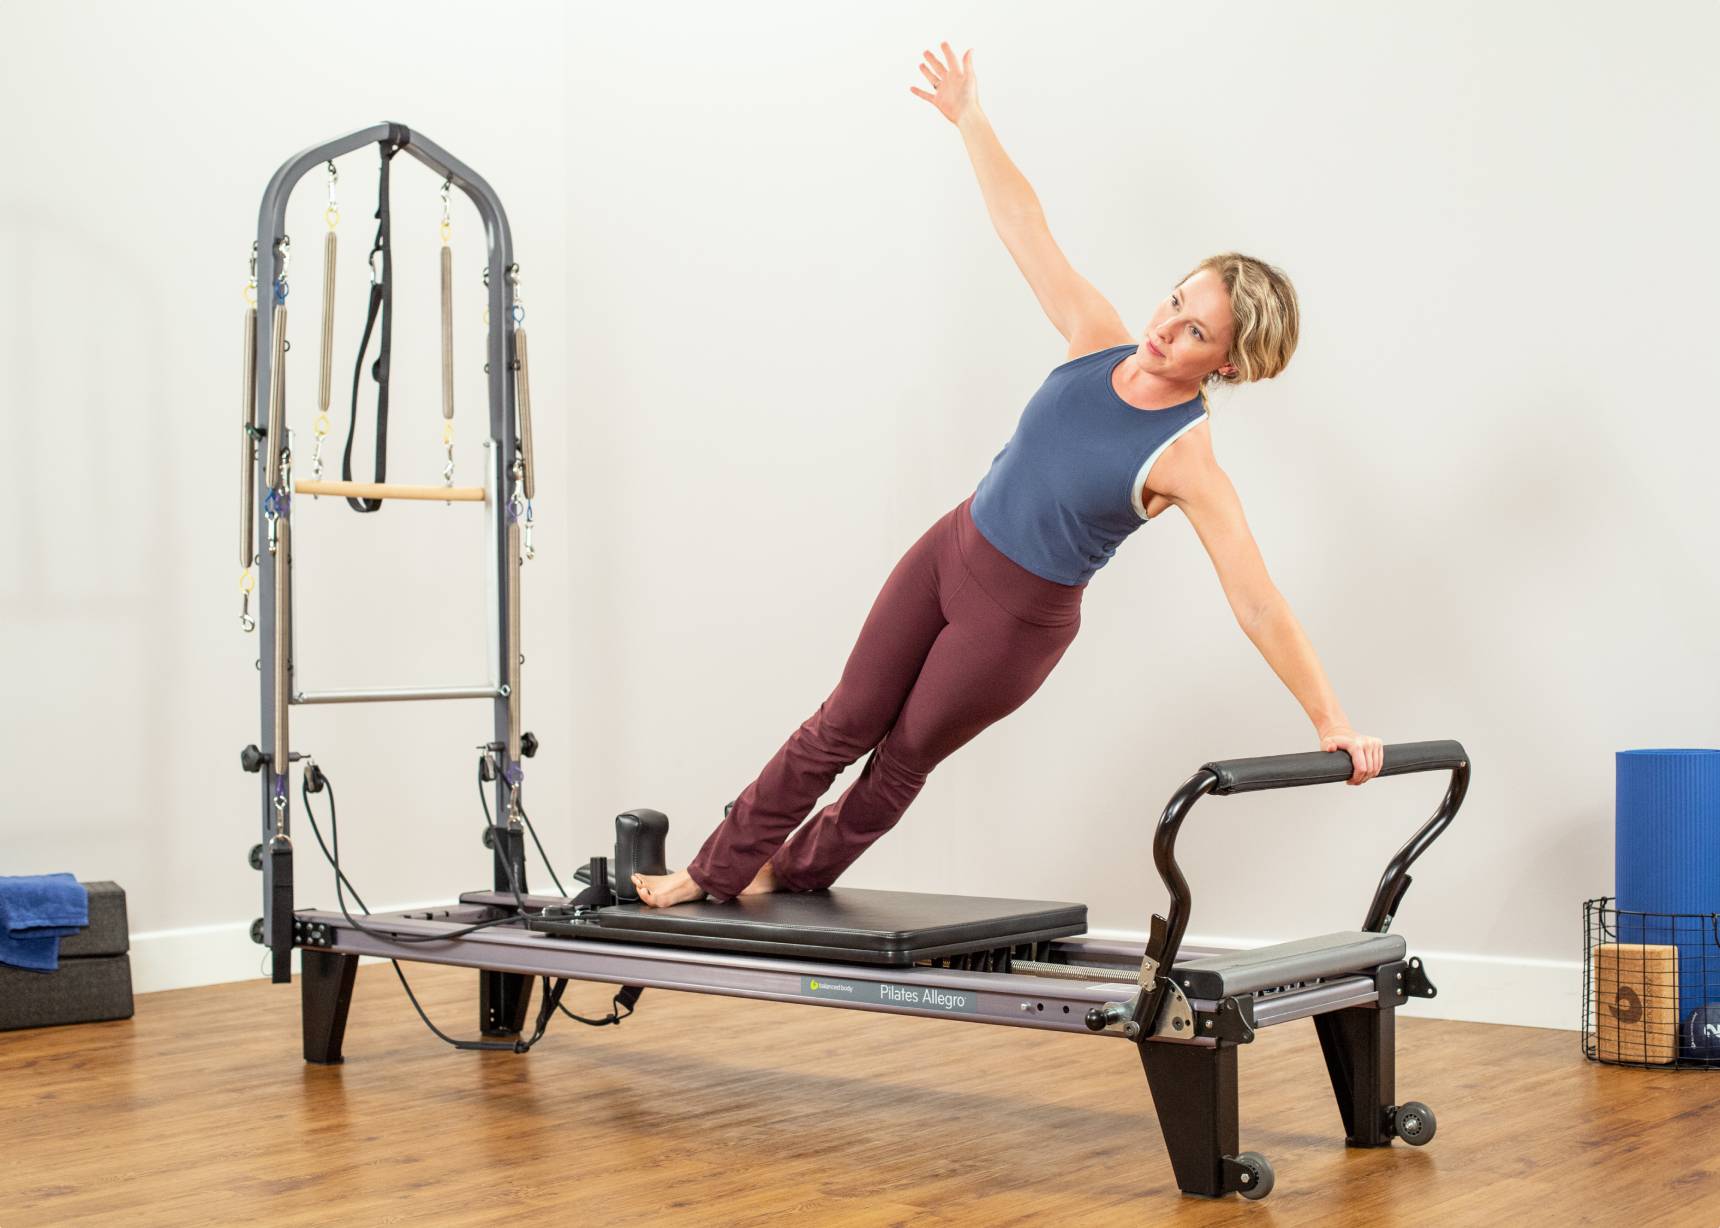 The Allegro reformer itself offers a wide range of exercises including leg presses, arm exercises, and abdominal exercises. 